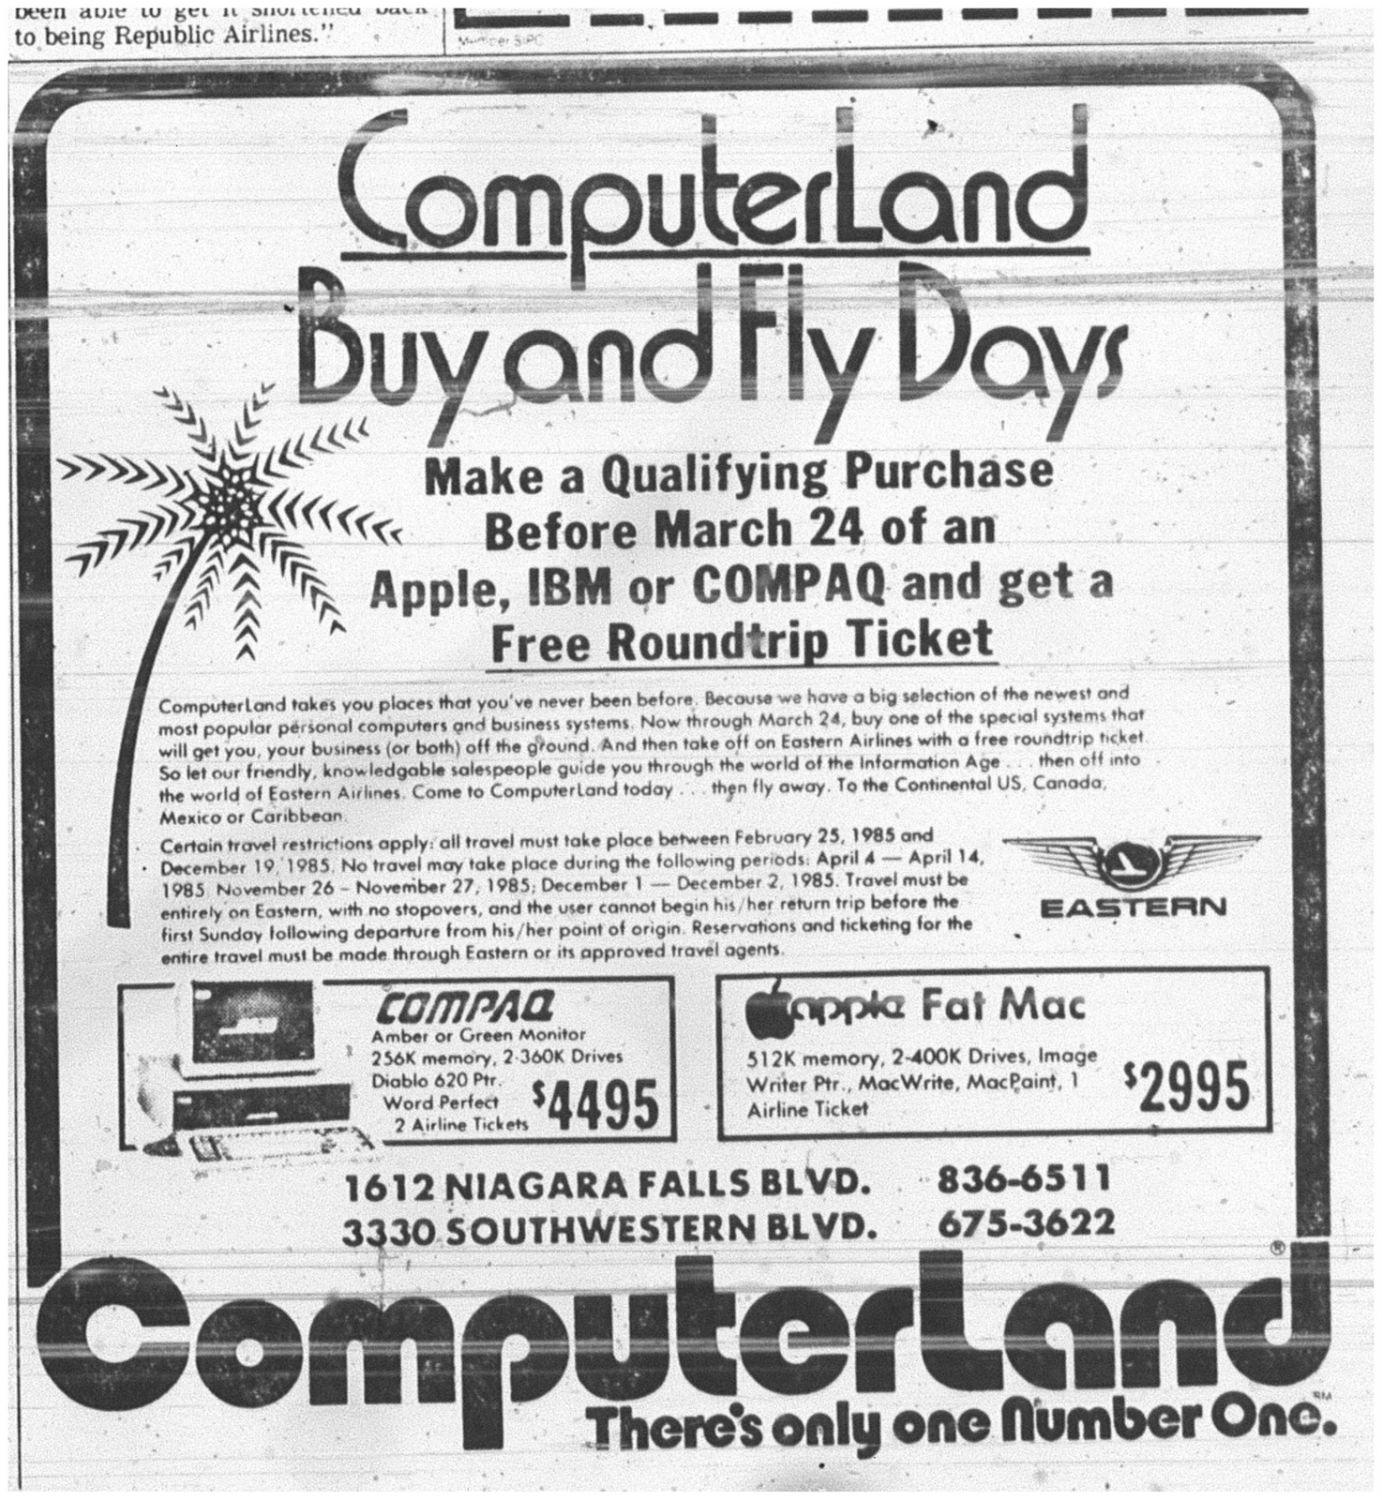 A Buffalo News print advertisement from March 1985: “ComputerLand Buy and Fly Dats – Make a Qualifying Purchase Before March 24 of an Apple, IBM or COMPAQ and get a Free Roundtrip Ticket.